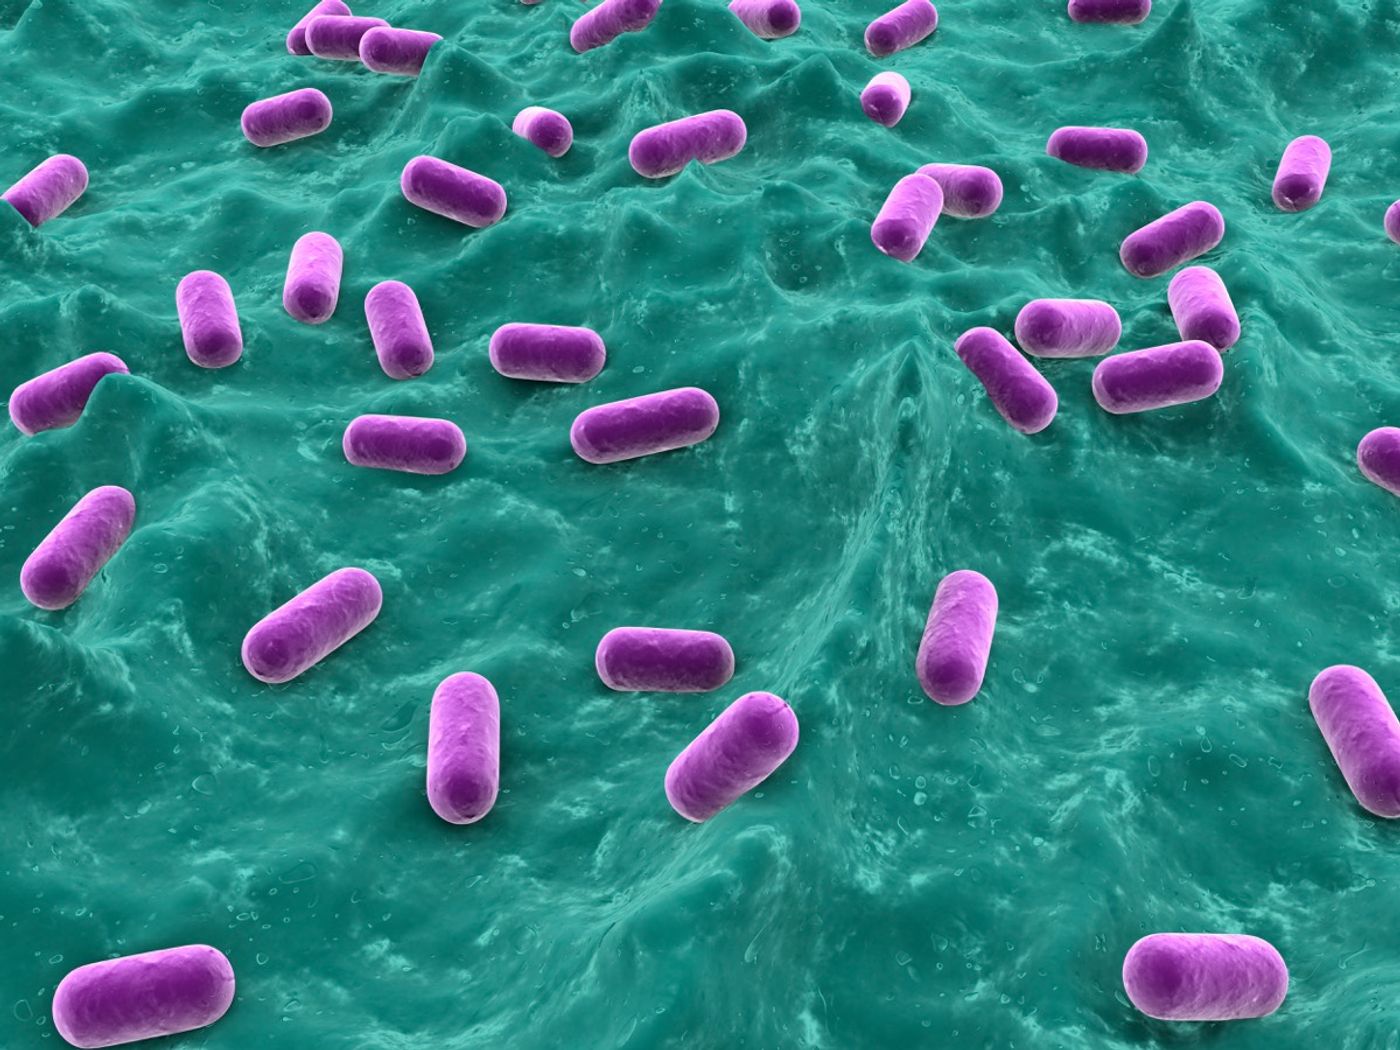 Lactobacillus johnsonii has anti-inflammatory properties that could reduce cancer risks